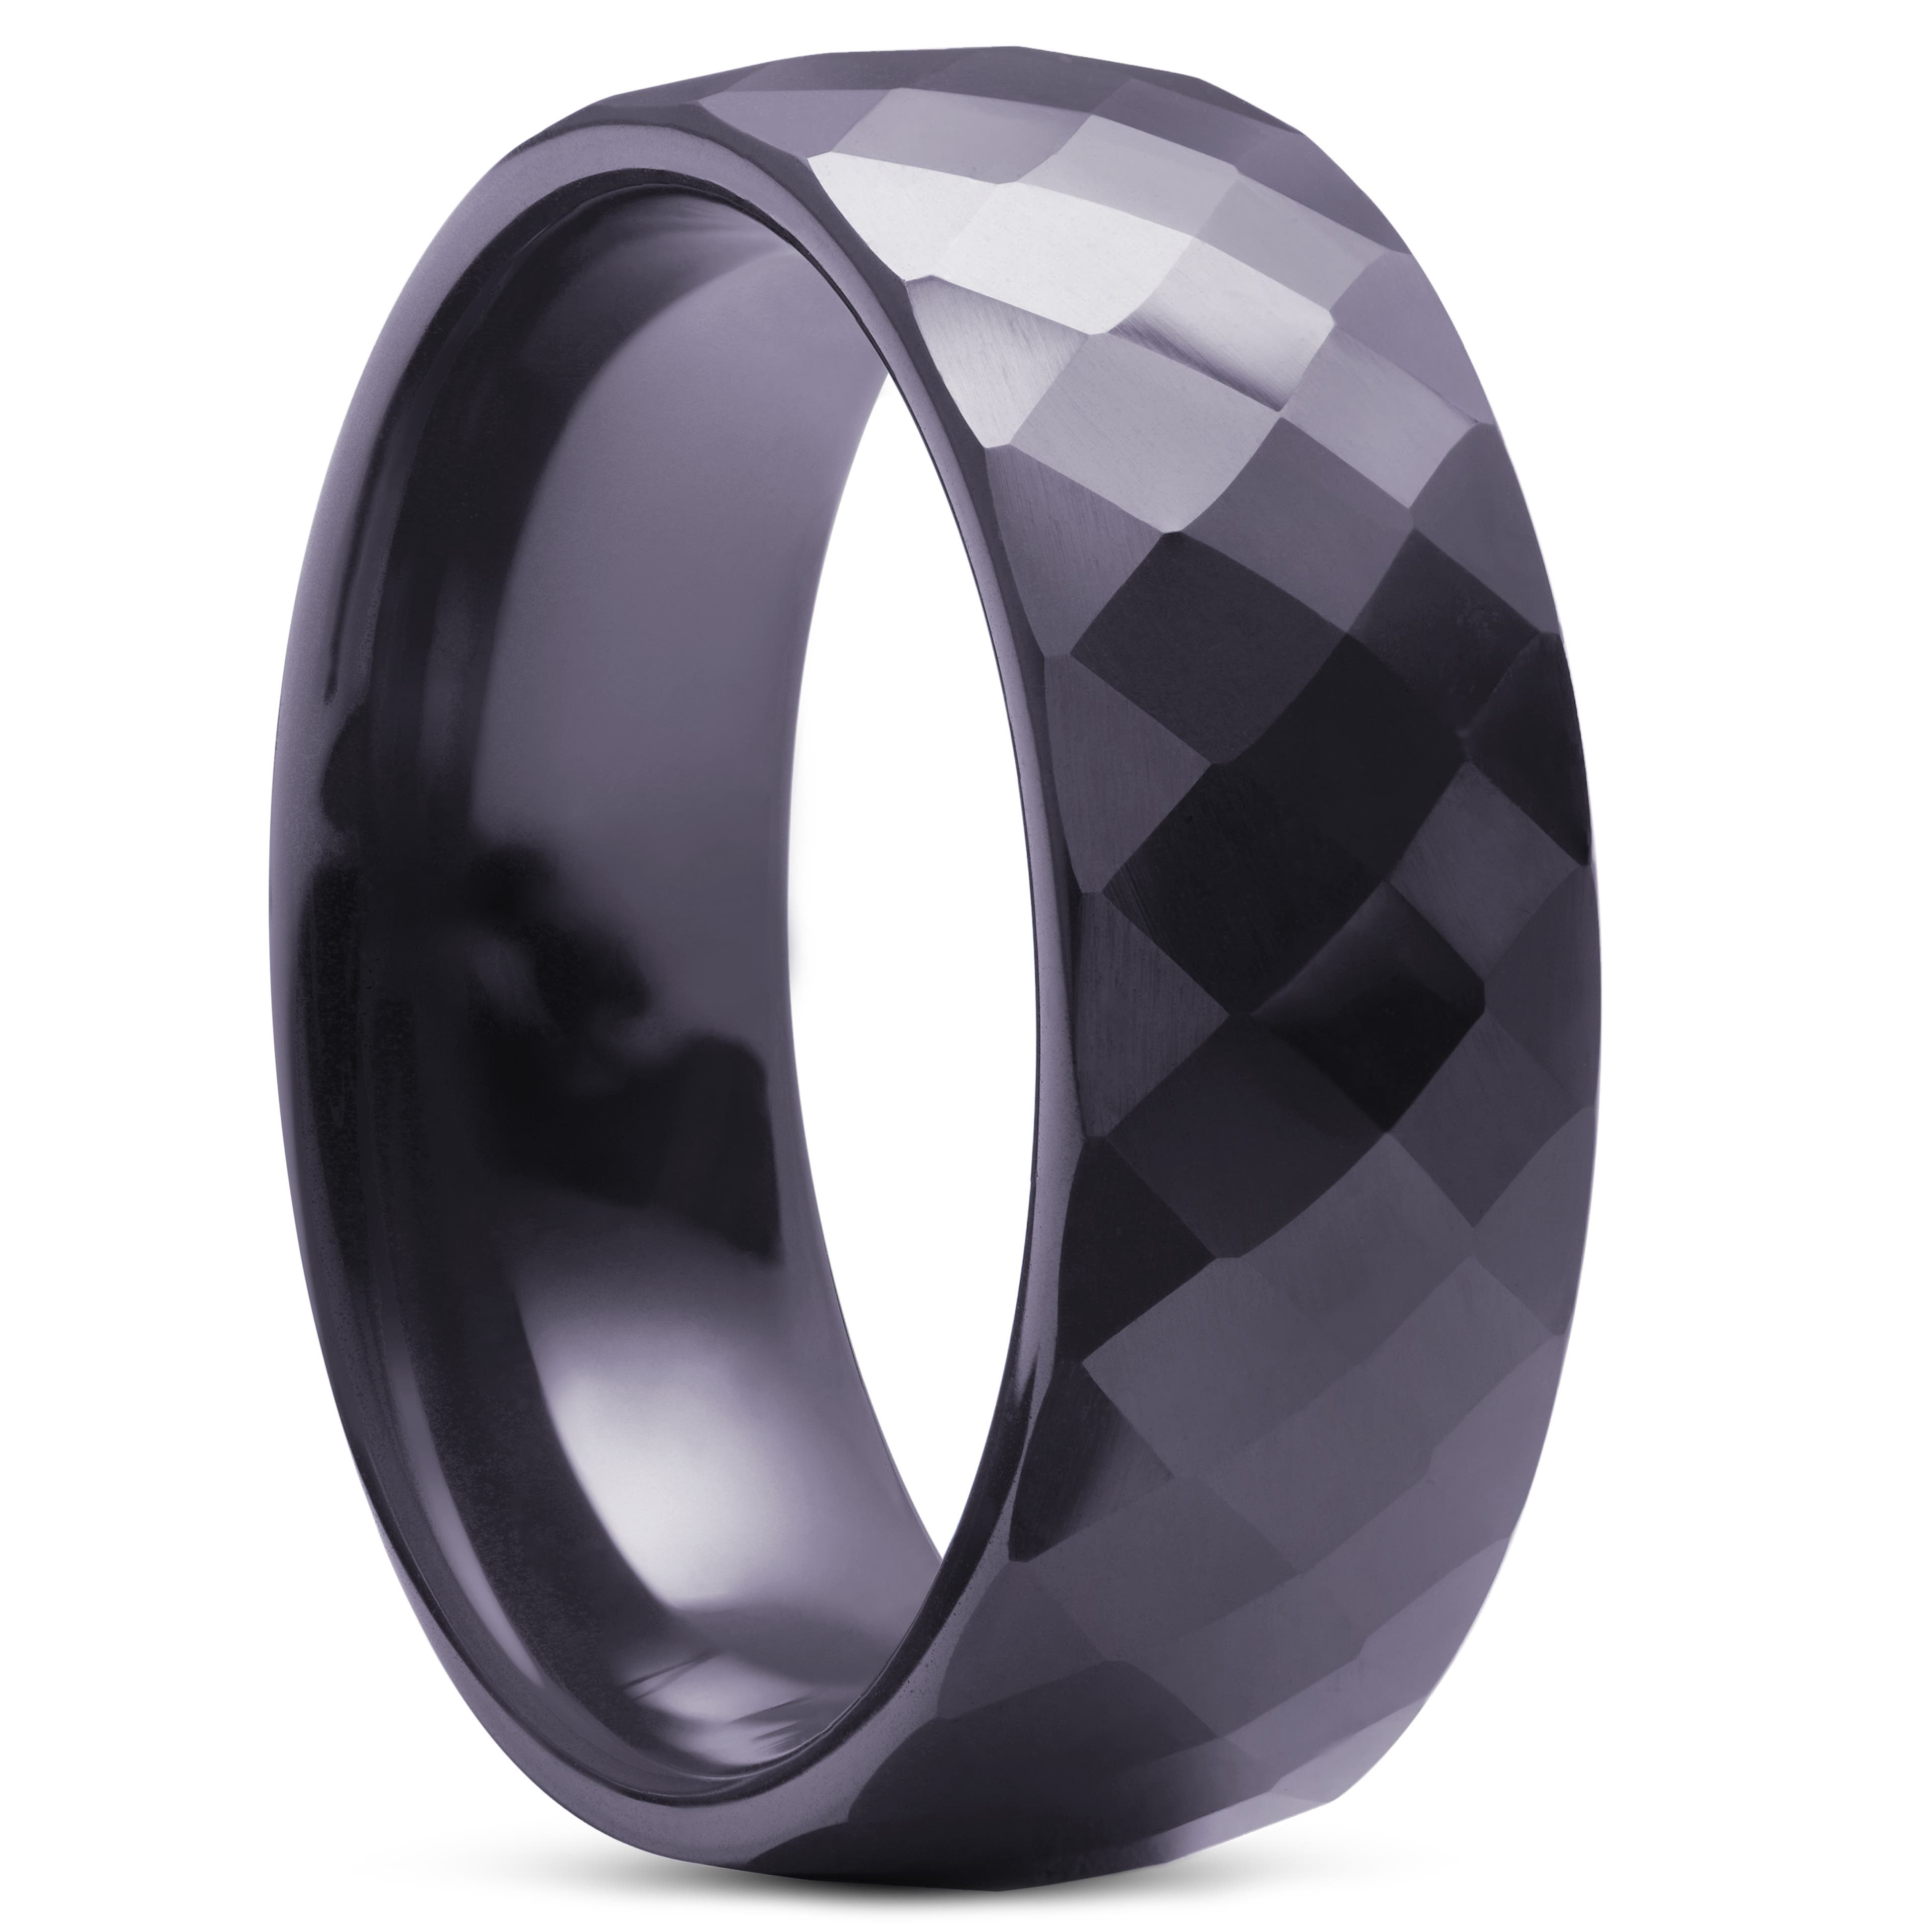 8 mm Charcoal Faceted Ceramic Ring